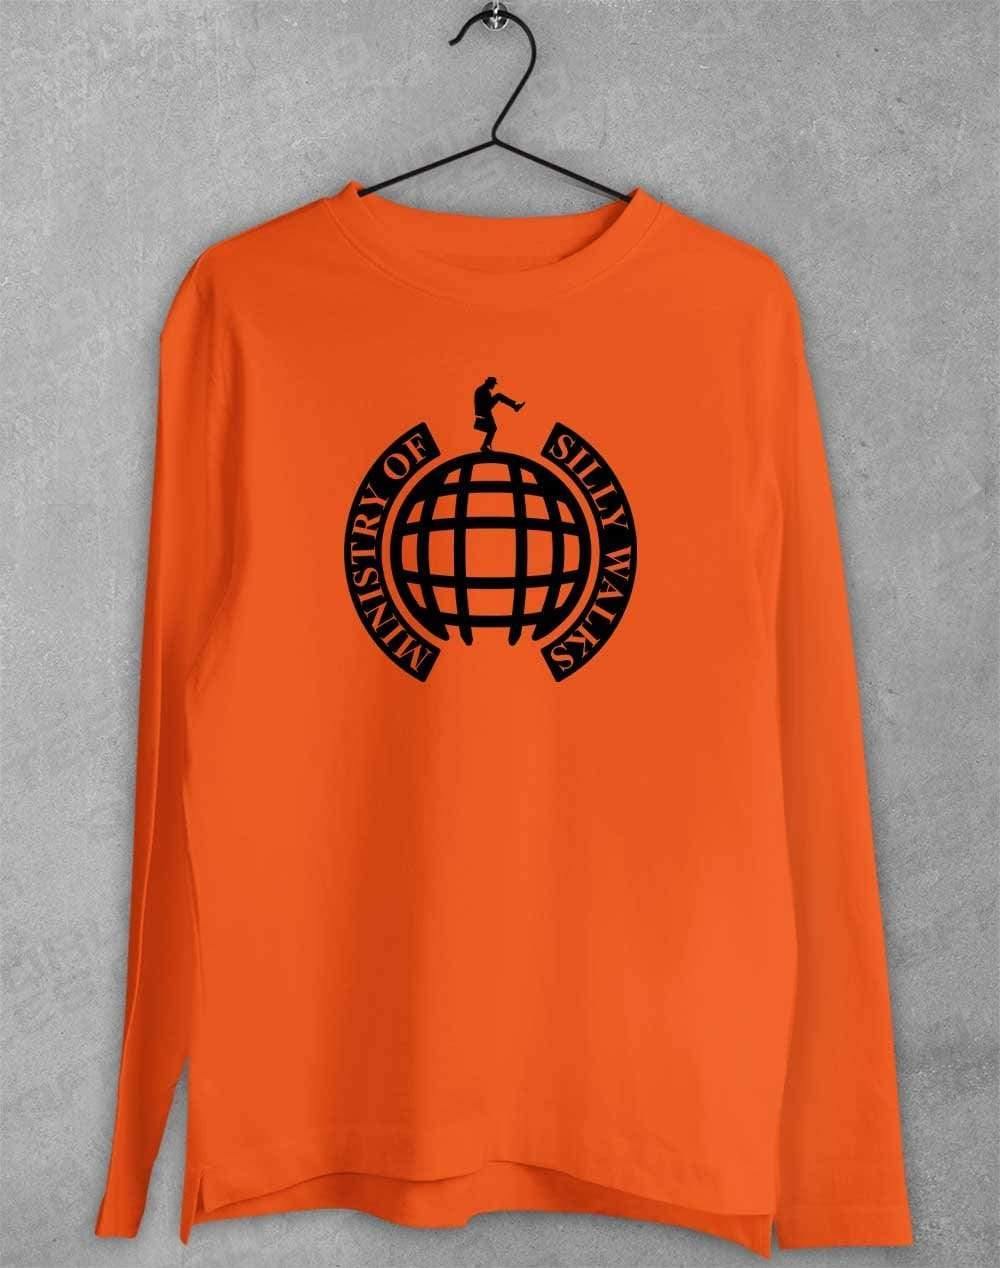 Ministry of Silly Walks Long Sleeve T-Shirt S / Orange  - Off World Tees